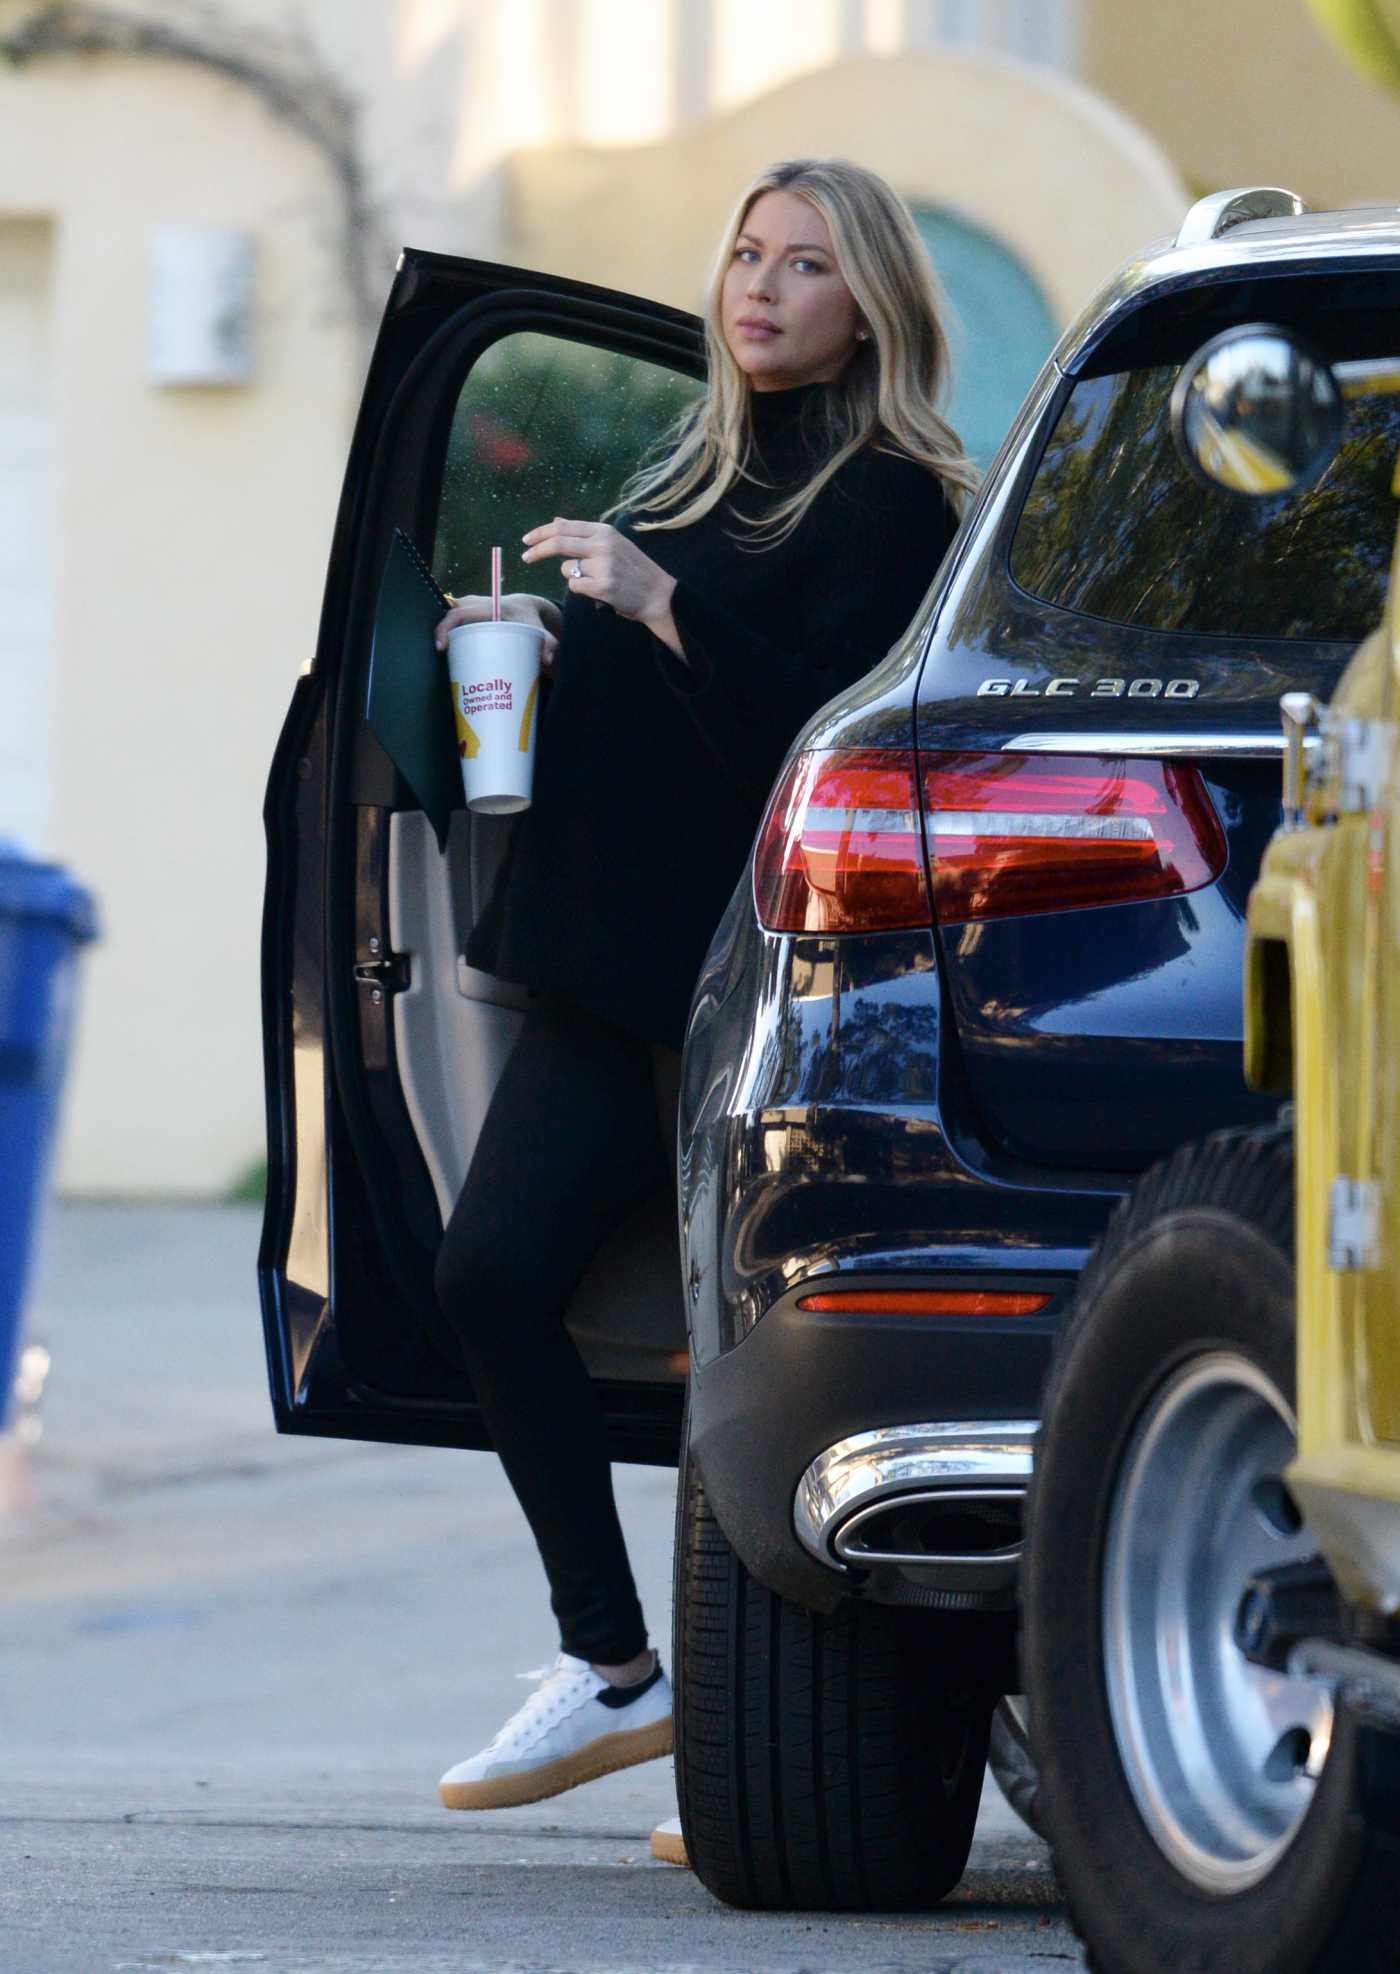 Stassi Schroeder in a Black Outfit Heads to a Meeting in Los Angeles 11/15/2020